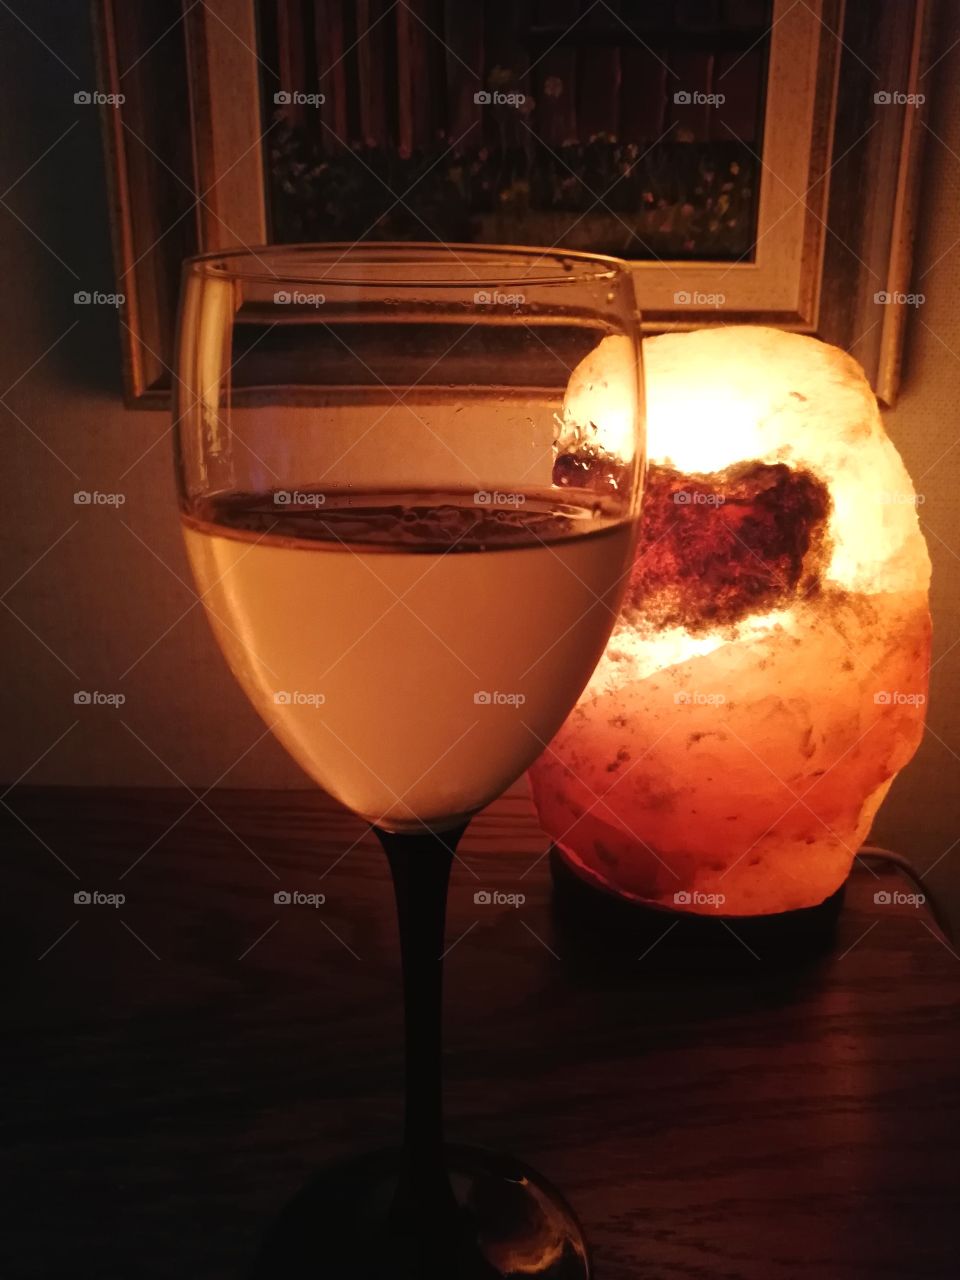 A see-through wine glass with a black leg standing on a brown wooden table in a dark room. The surface of the glass is wet for the cold drink. Clear drops become visible.Behind is an orange light, made of salt and a painting on the wall.